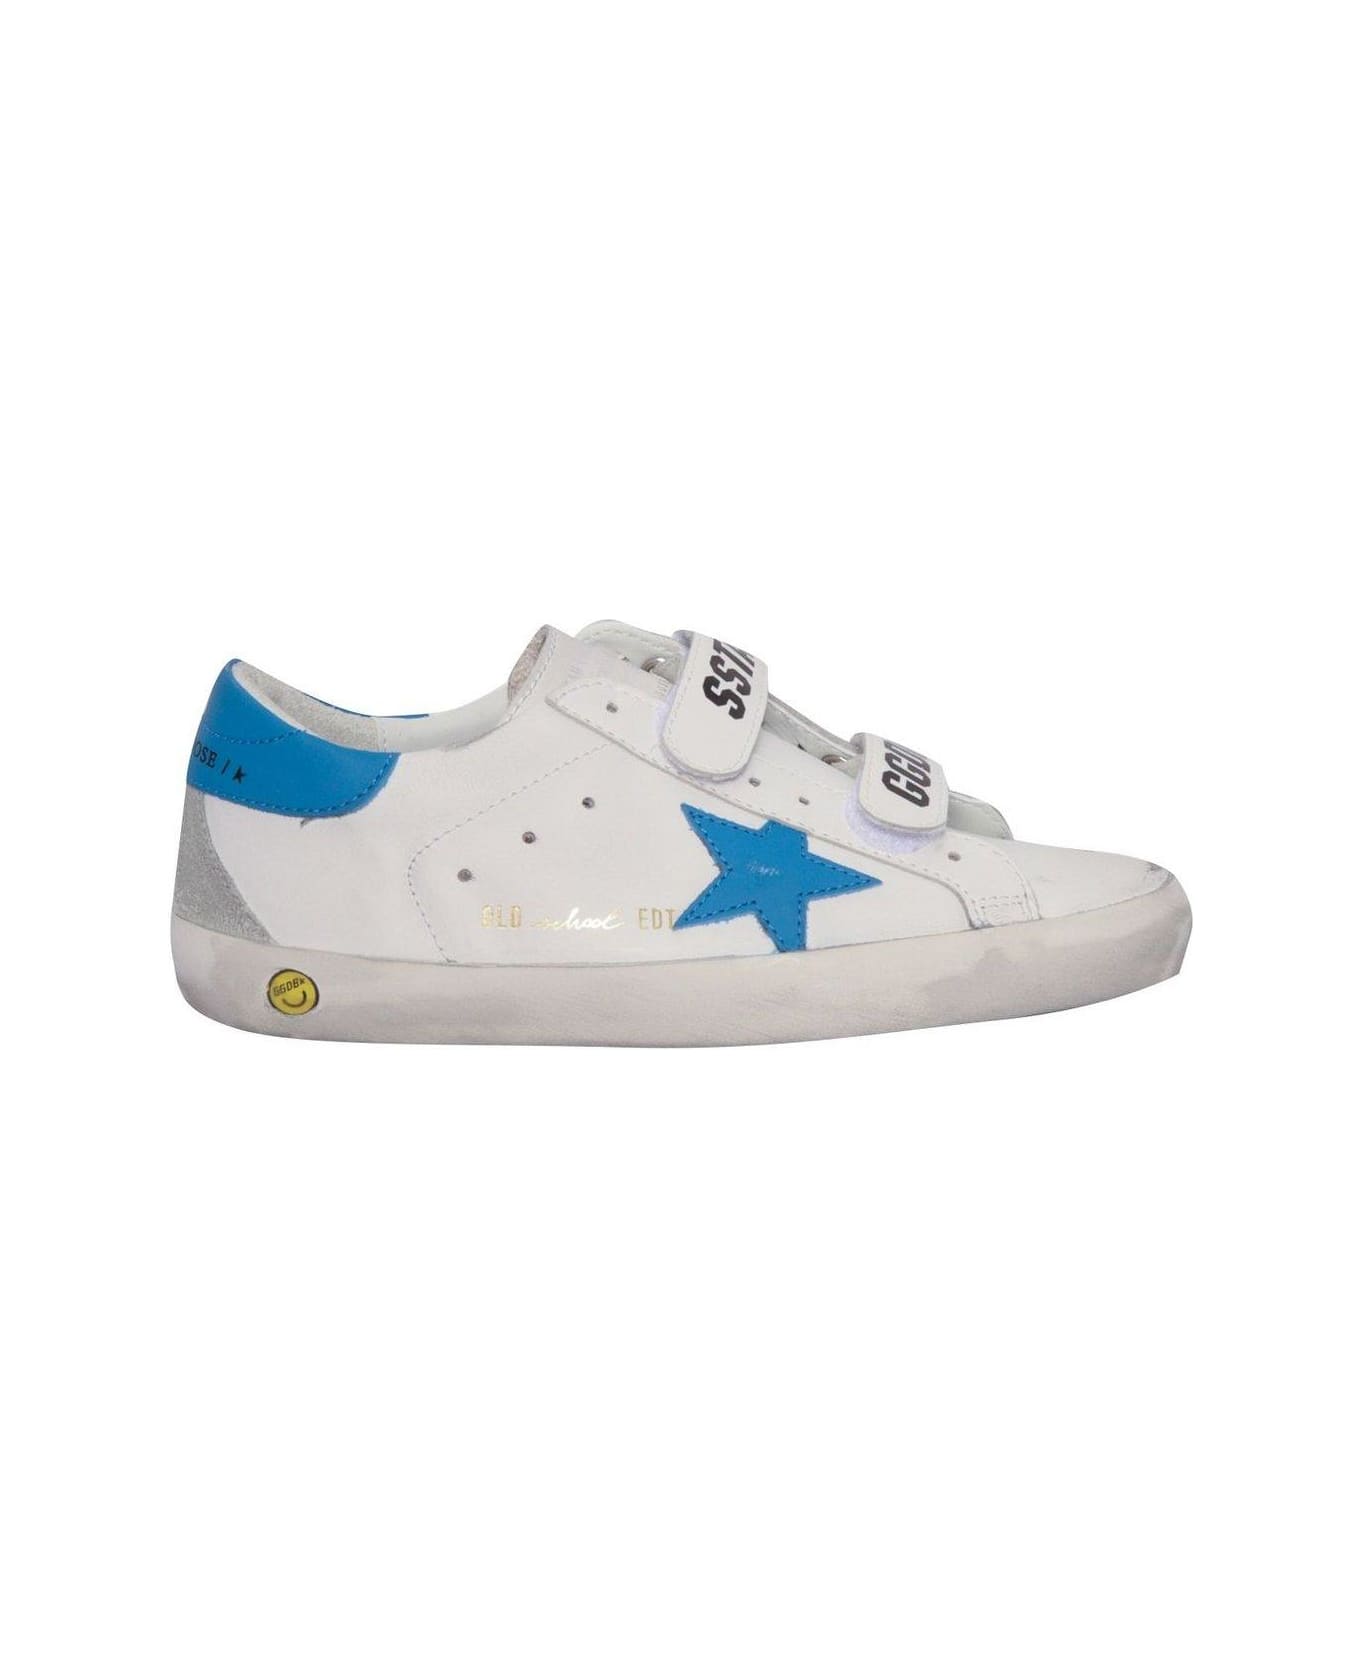 Golden Goose Old School Star Patch Sneakers - White Light Blue Ice